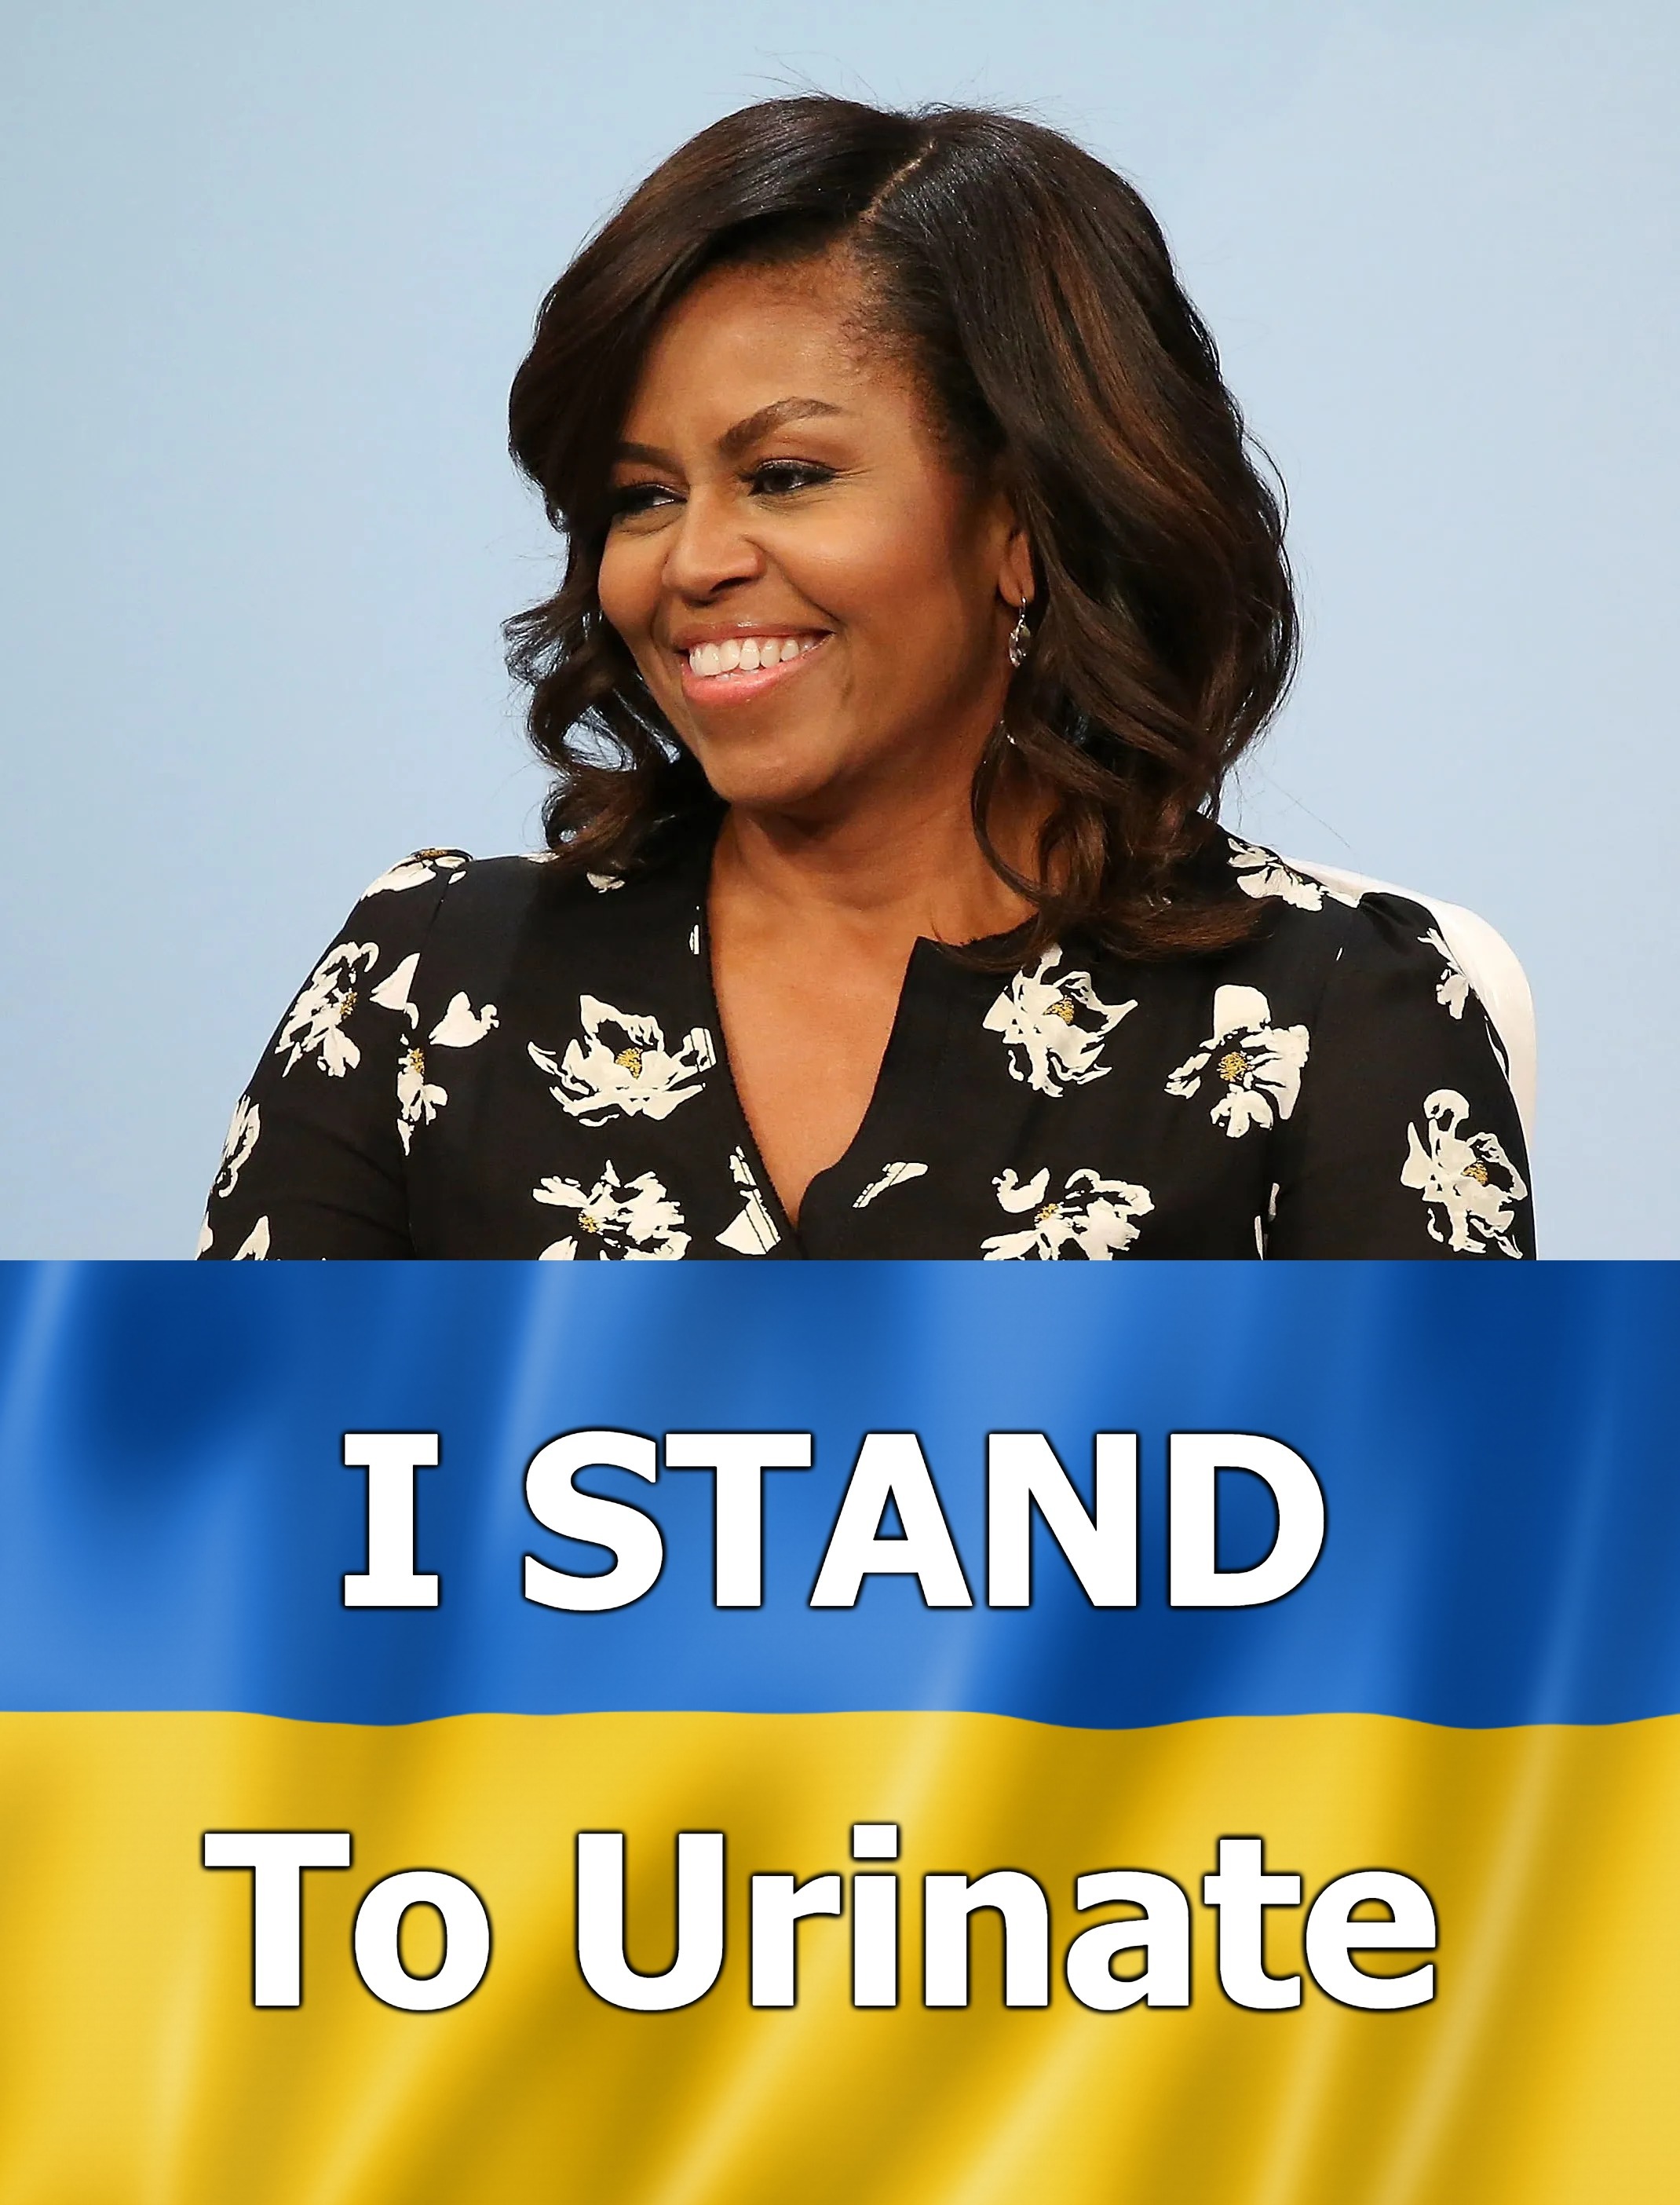 Tranny in America: I Stand to Urinate | image tagged in moochelle obama,first tranny,tired of hearing about transgenders,transgender bathroom,transgender,michael lavaughn robinson | made w/ Imgflip meme maker